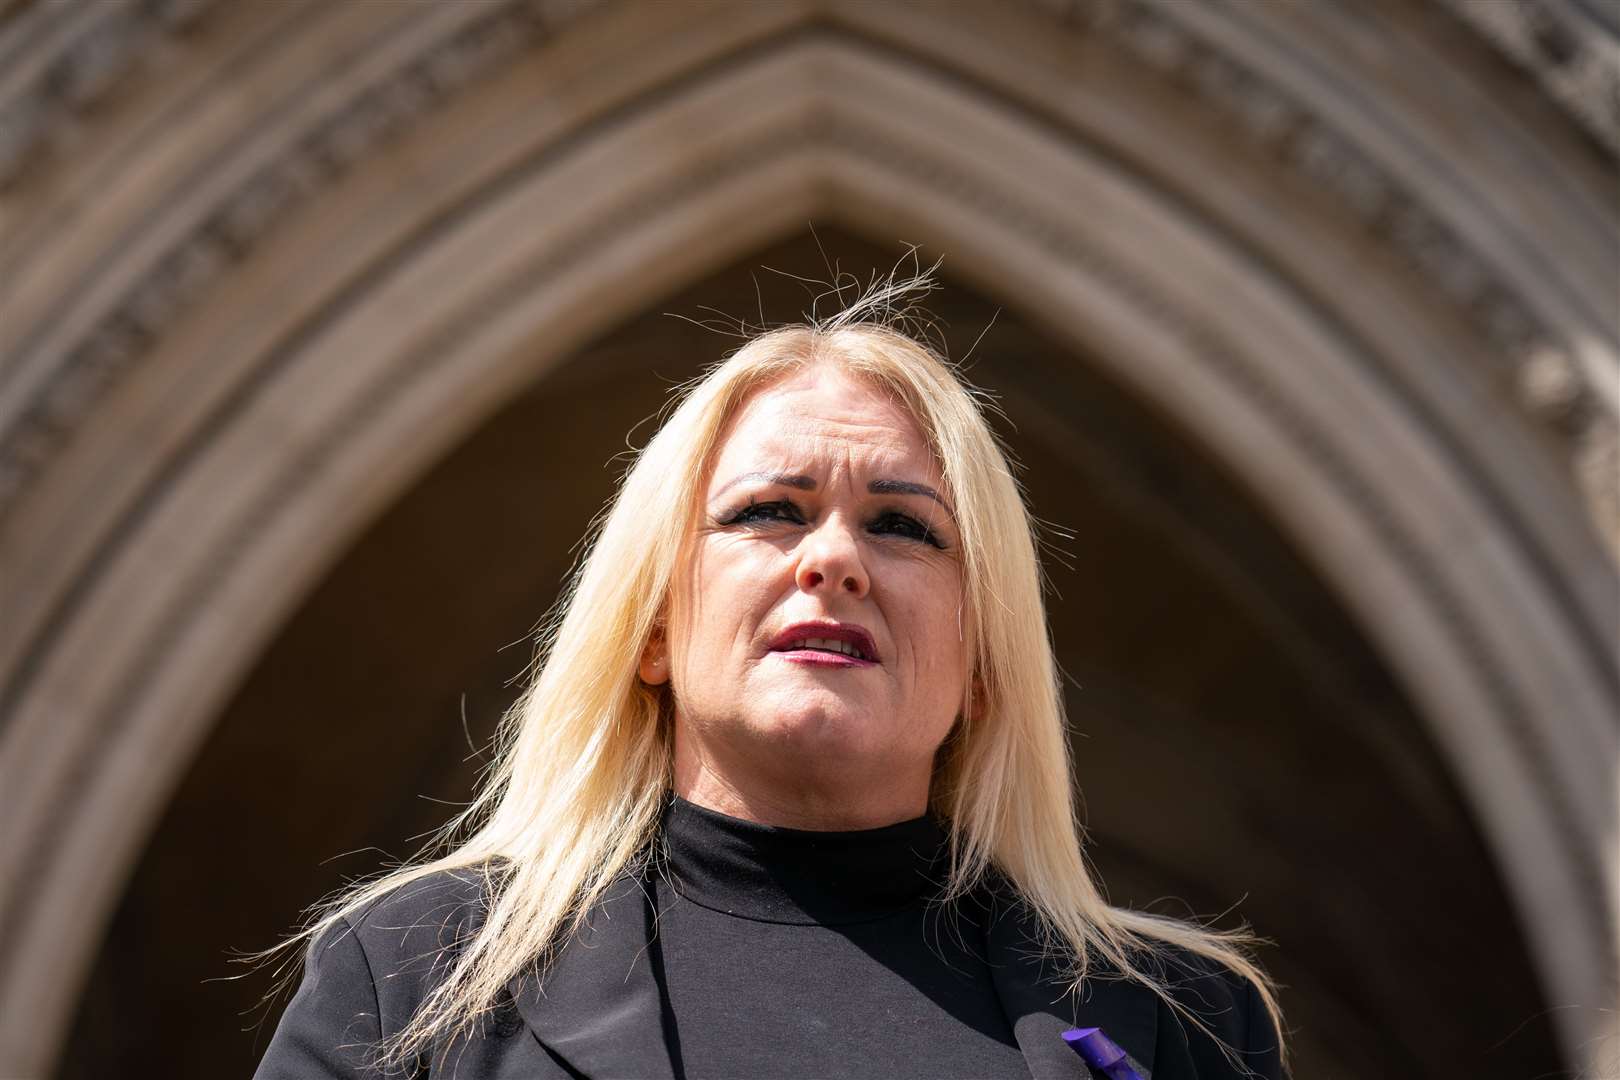 The mother of Archie Battersbee, Hollie Dance, speaks to the media outside the Royal Courts of Justice, London (Dominic Lipinski/PA)